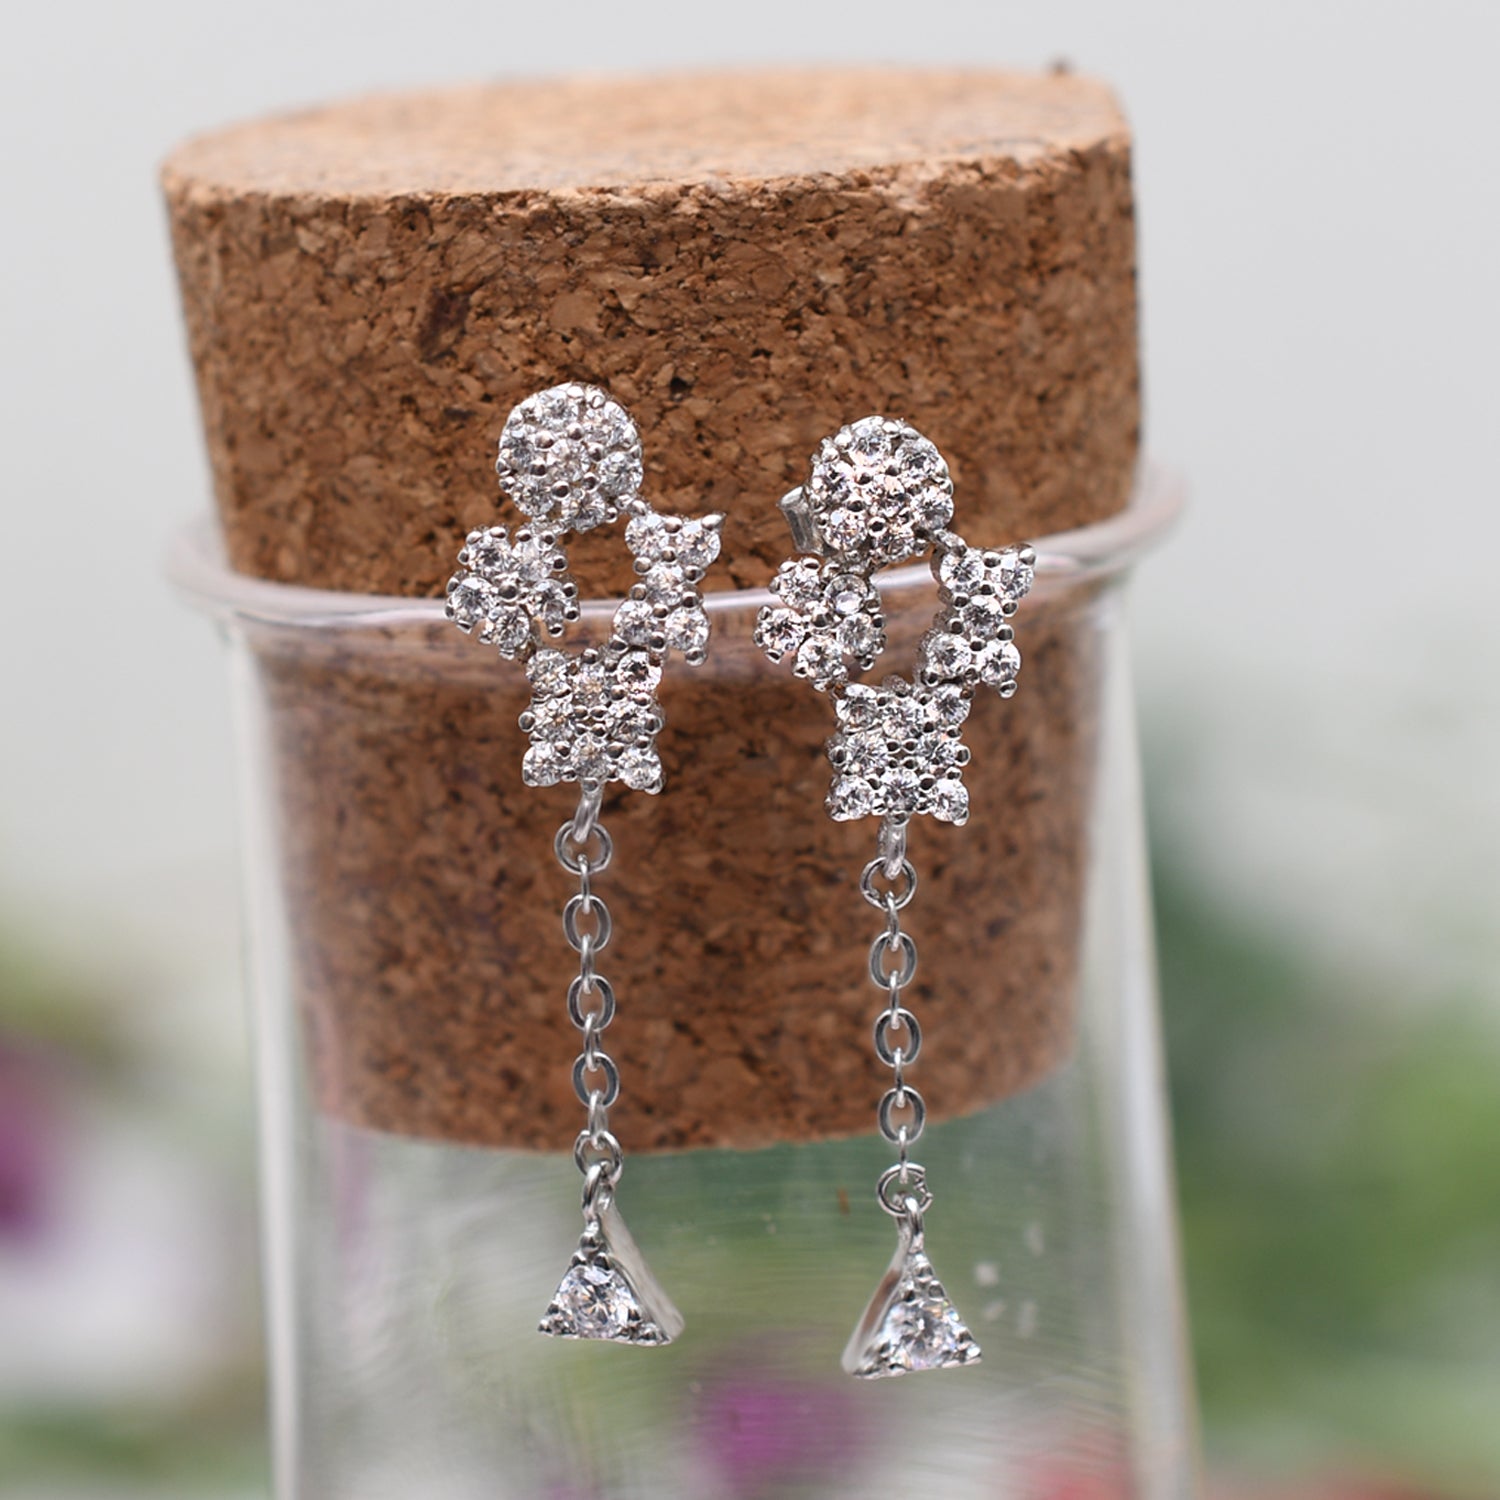 Silver Sparkle Fantasy with Danglers Earrings